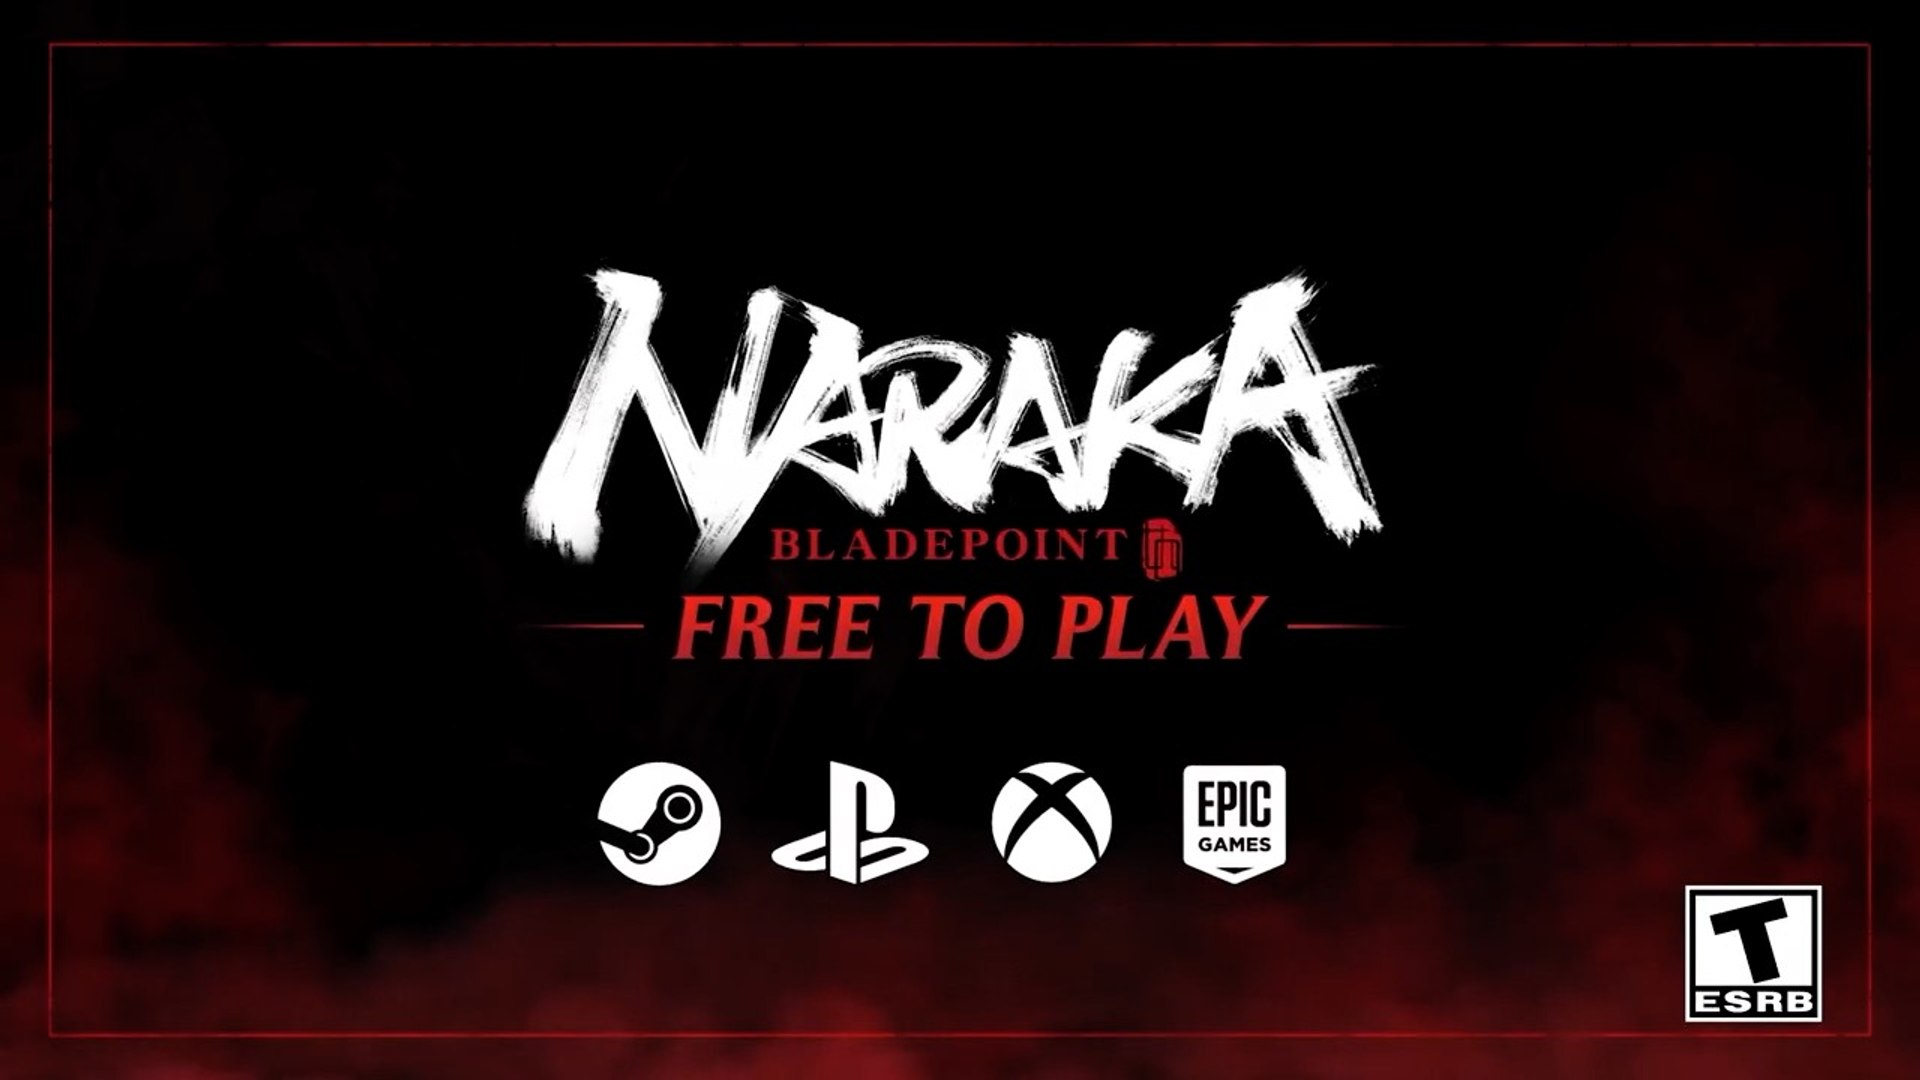 NARAKA: BLADEPOINT FREE TO PLAY & PS5 Announcement Trailer